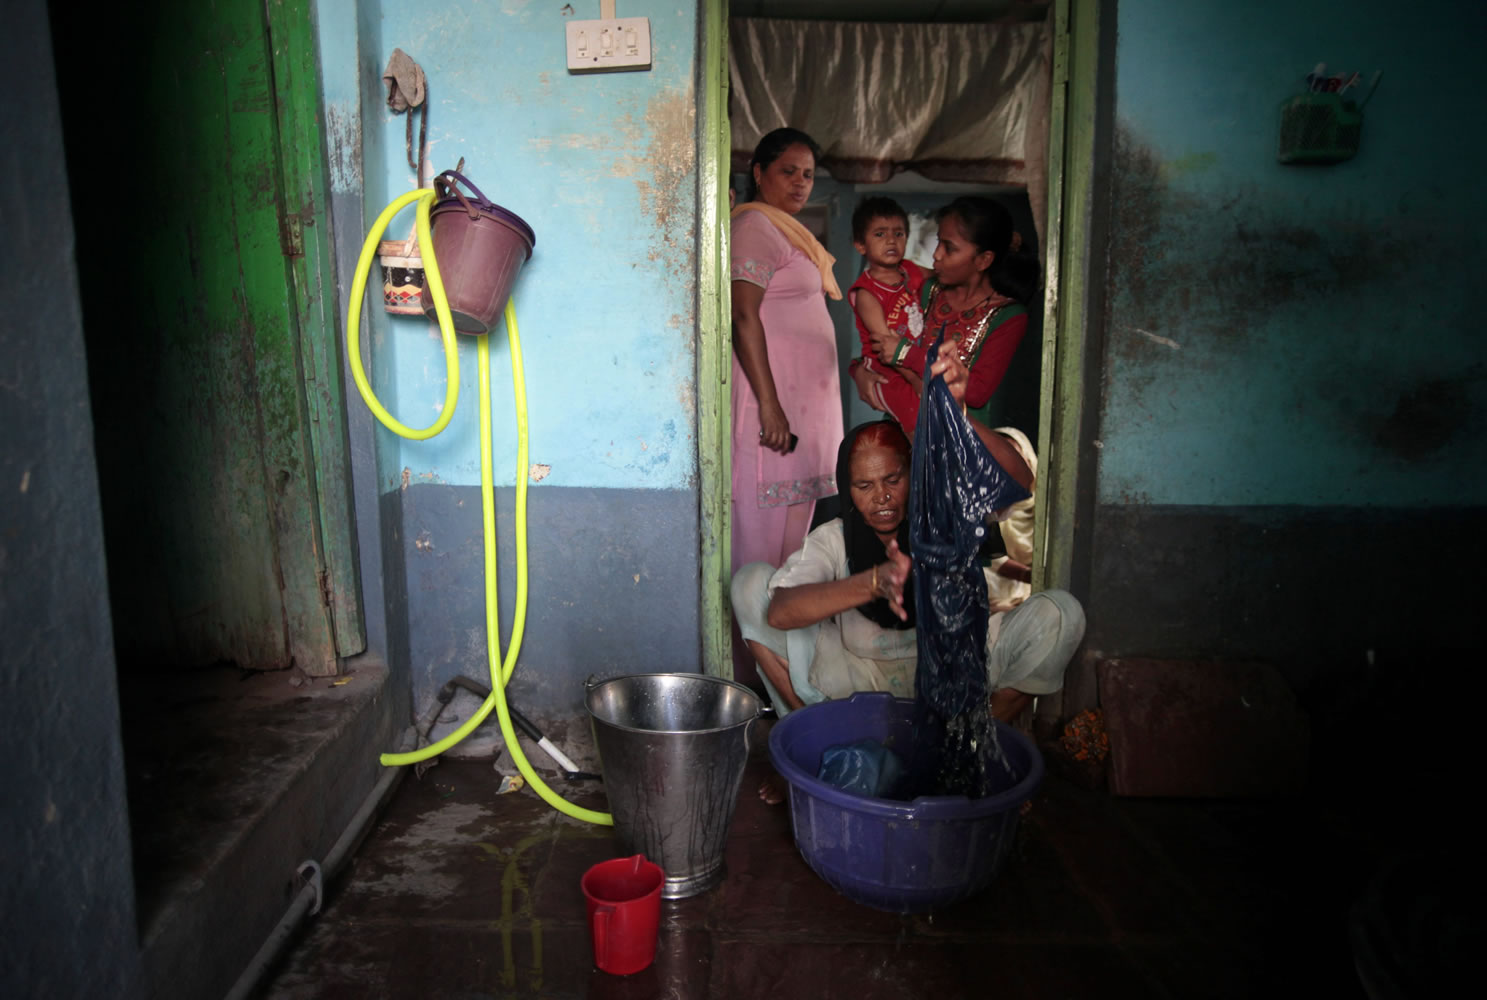 In this May 10, 2012 photo, Fatima Munshi, working as domestic help, washes clothes at a house in Khandwa, India. Living in Australia, Saroo Brierley, 30, reunited with his biological mother, Munshi, in February 2012, 25 years after an ill-fated train ride left him an orphan on the streets of Calcutta.